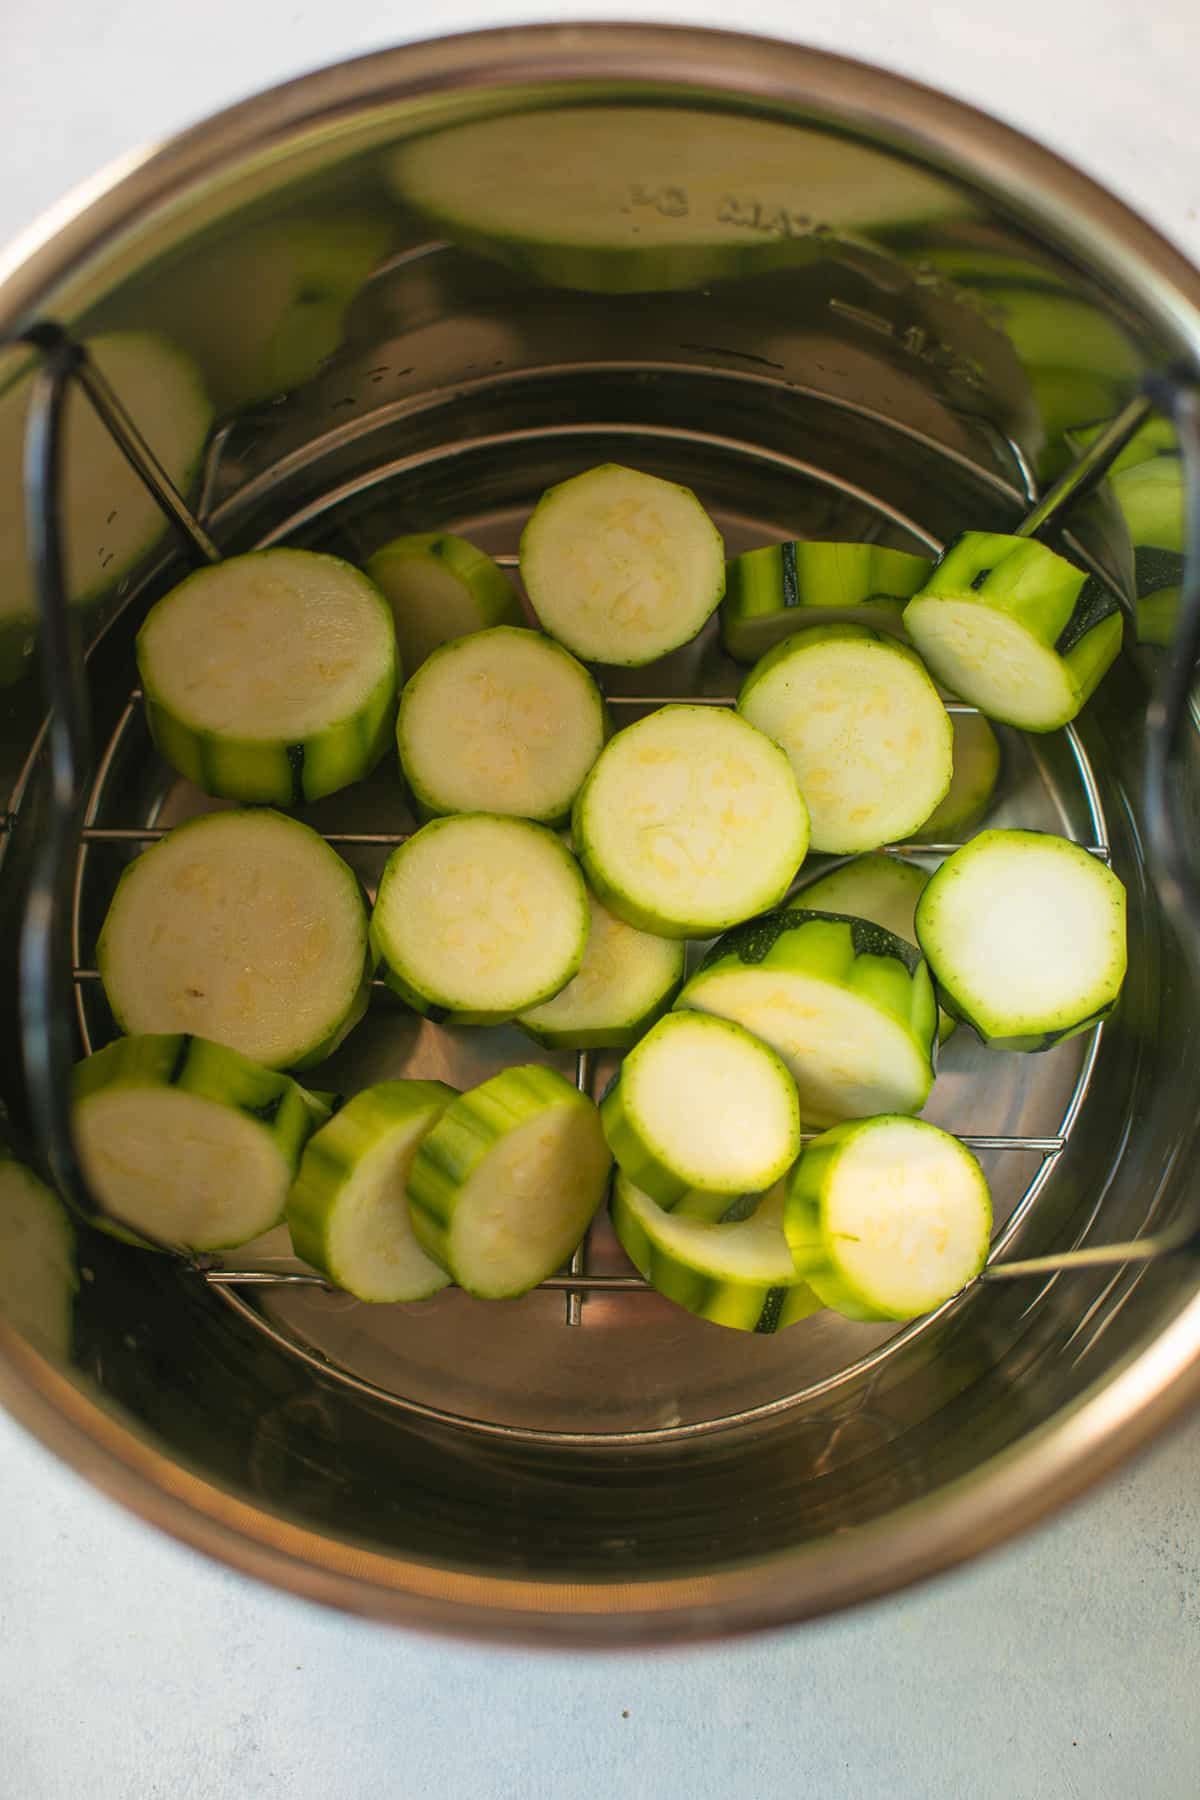 Zucchini slices inside an Instant Pot.